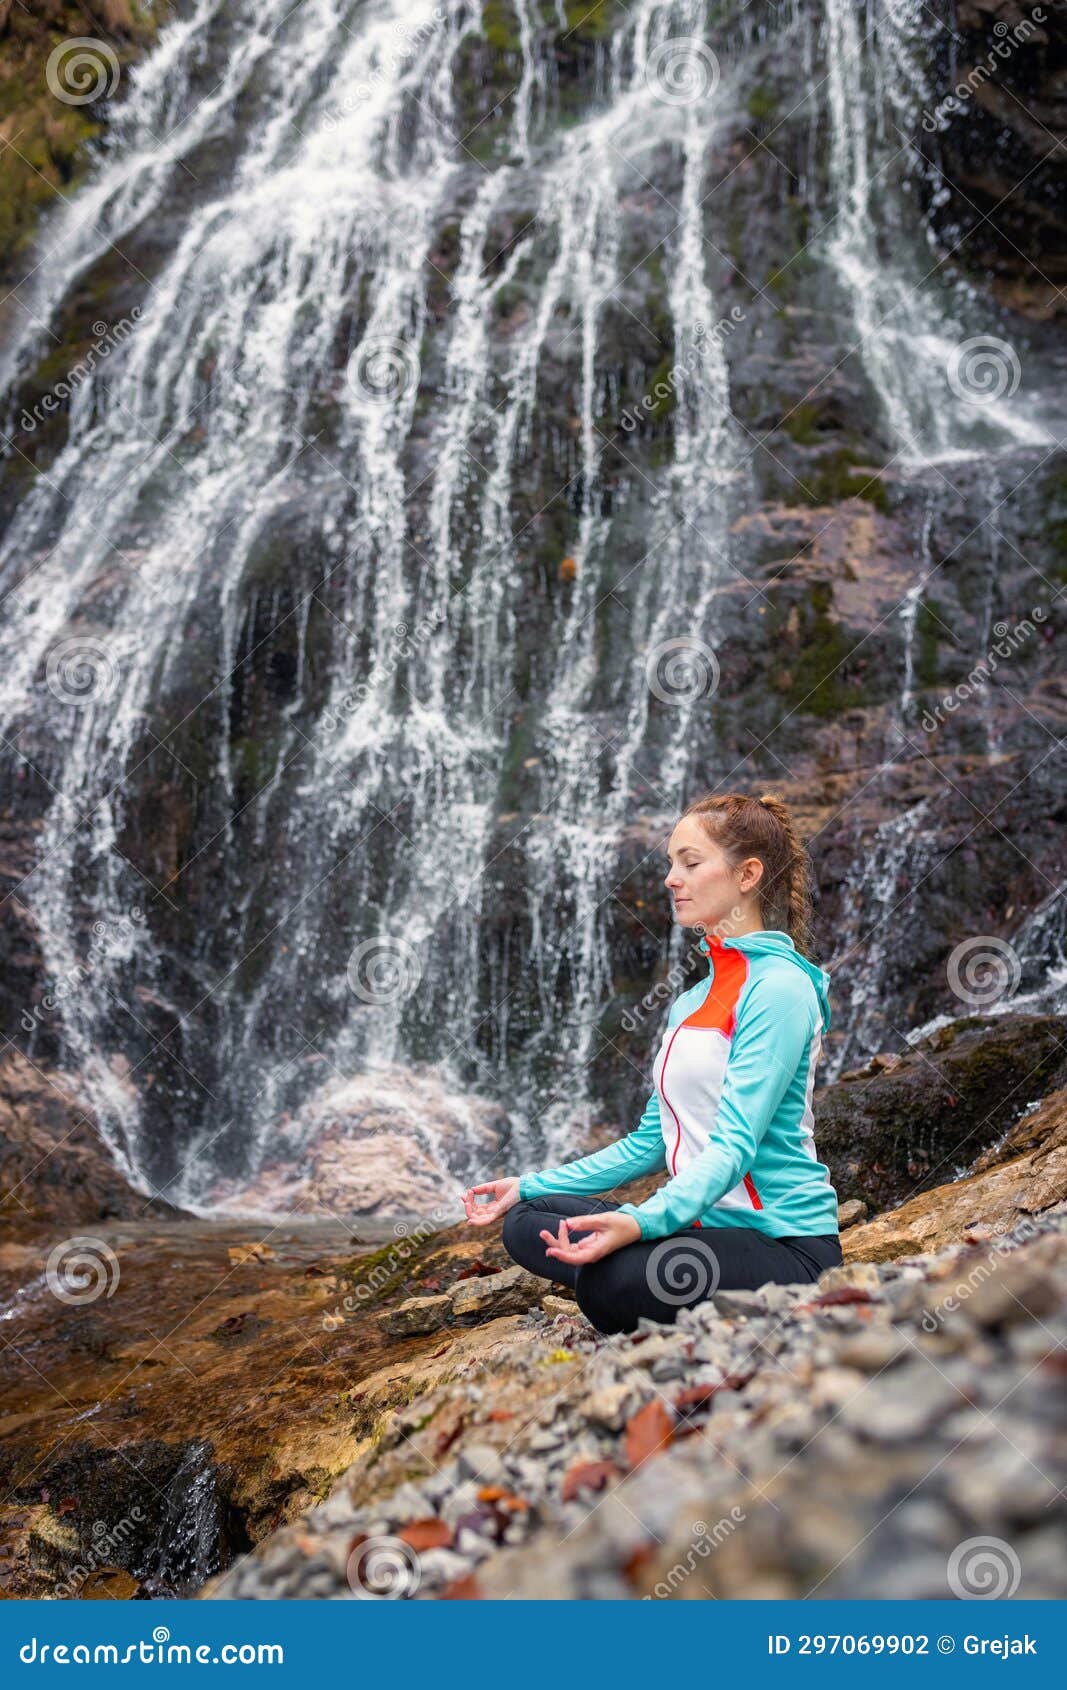 Meditation in Nature, a Girl Relaxing in a Yoga Pose Near a Waterfall ...